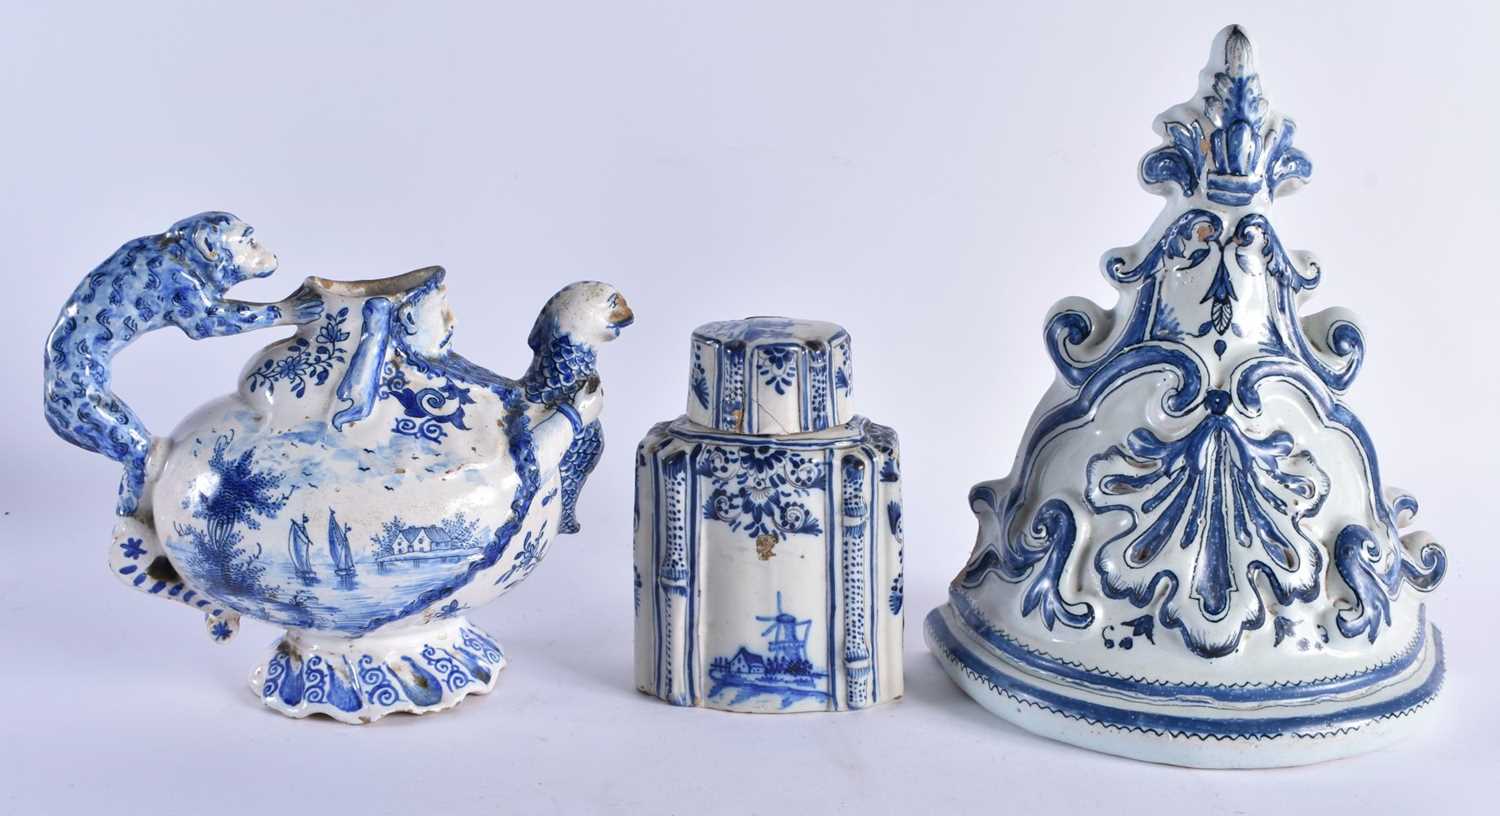 AN ANTIQUE DELFT FAIENCE WALL BRACKET together with a Delft figural monkey jug & a similar tea